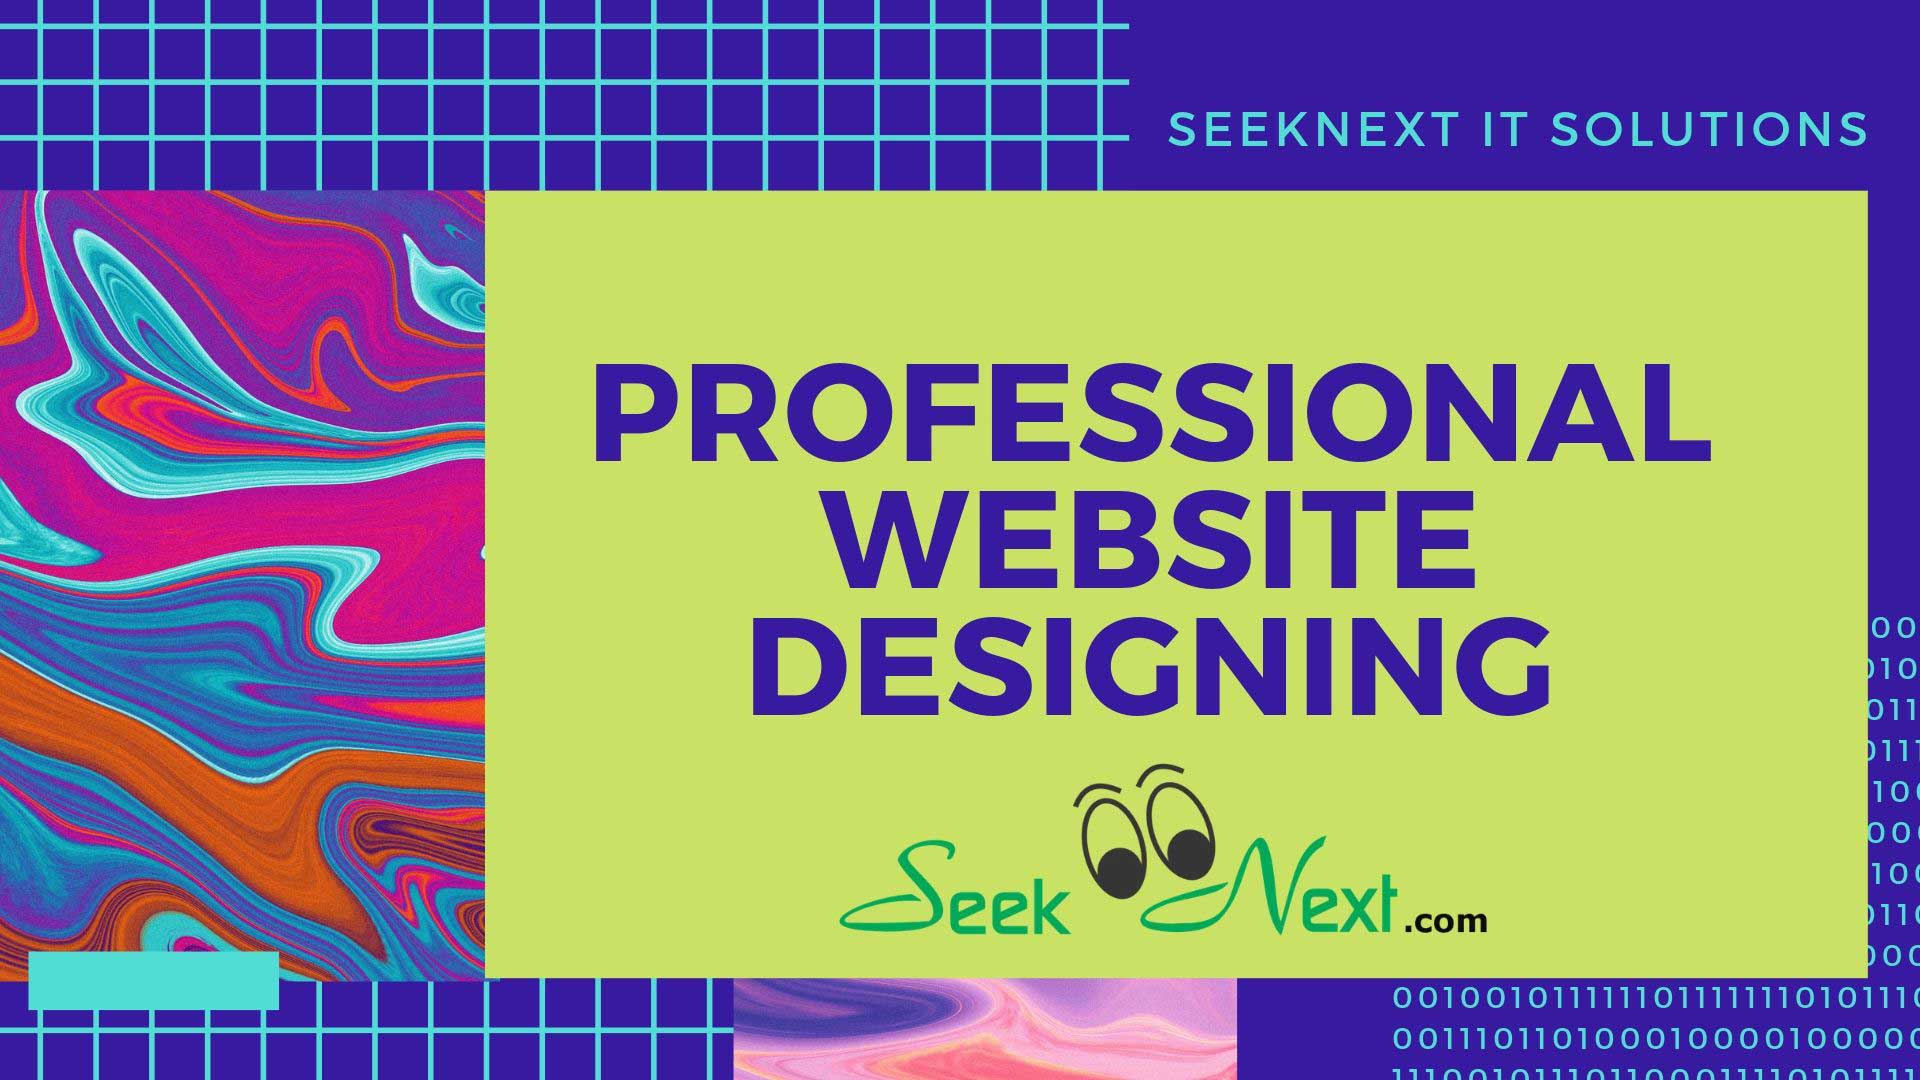 Why small business needs professional website designing